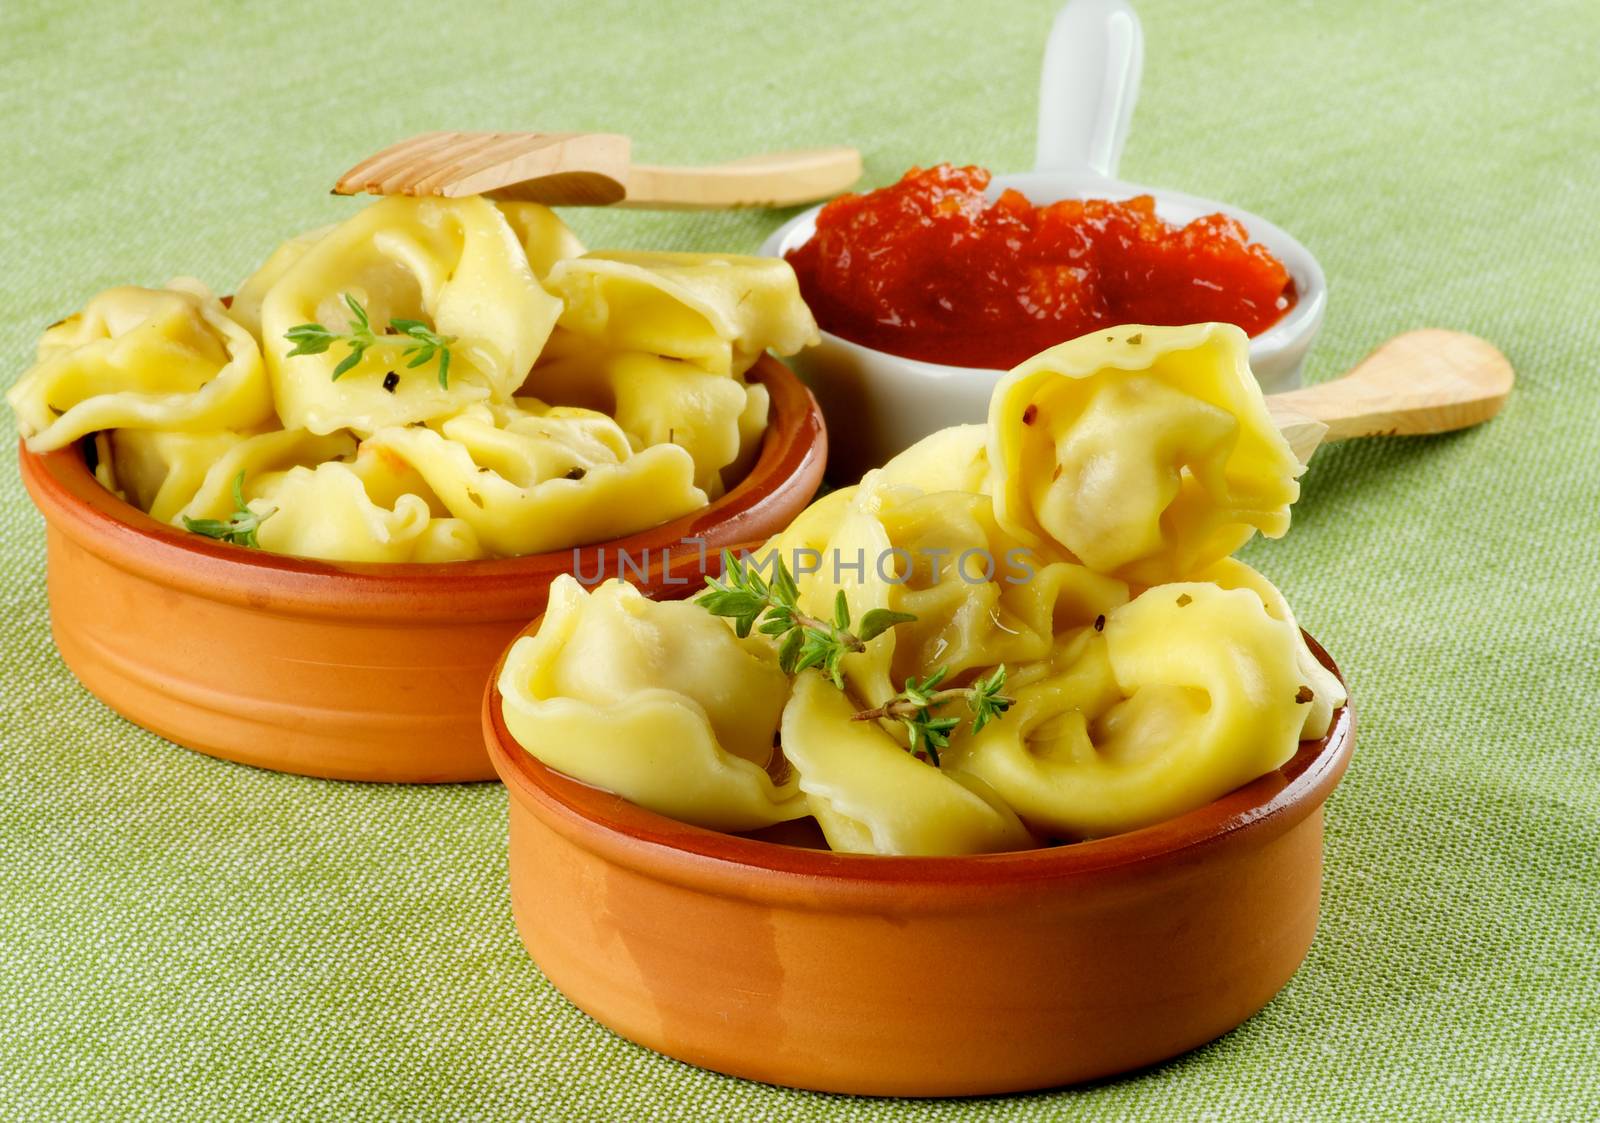 Delicious Meat Cappelletti with Herbs in Ceramic Bowls, Tomatoes Sauce and Wooden Forks closeup on Green Napkin background